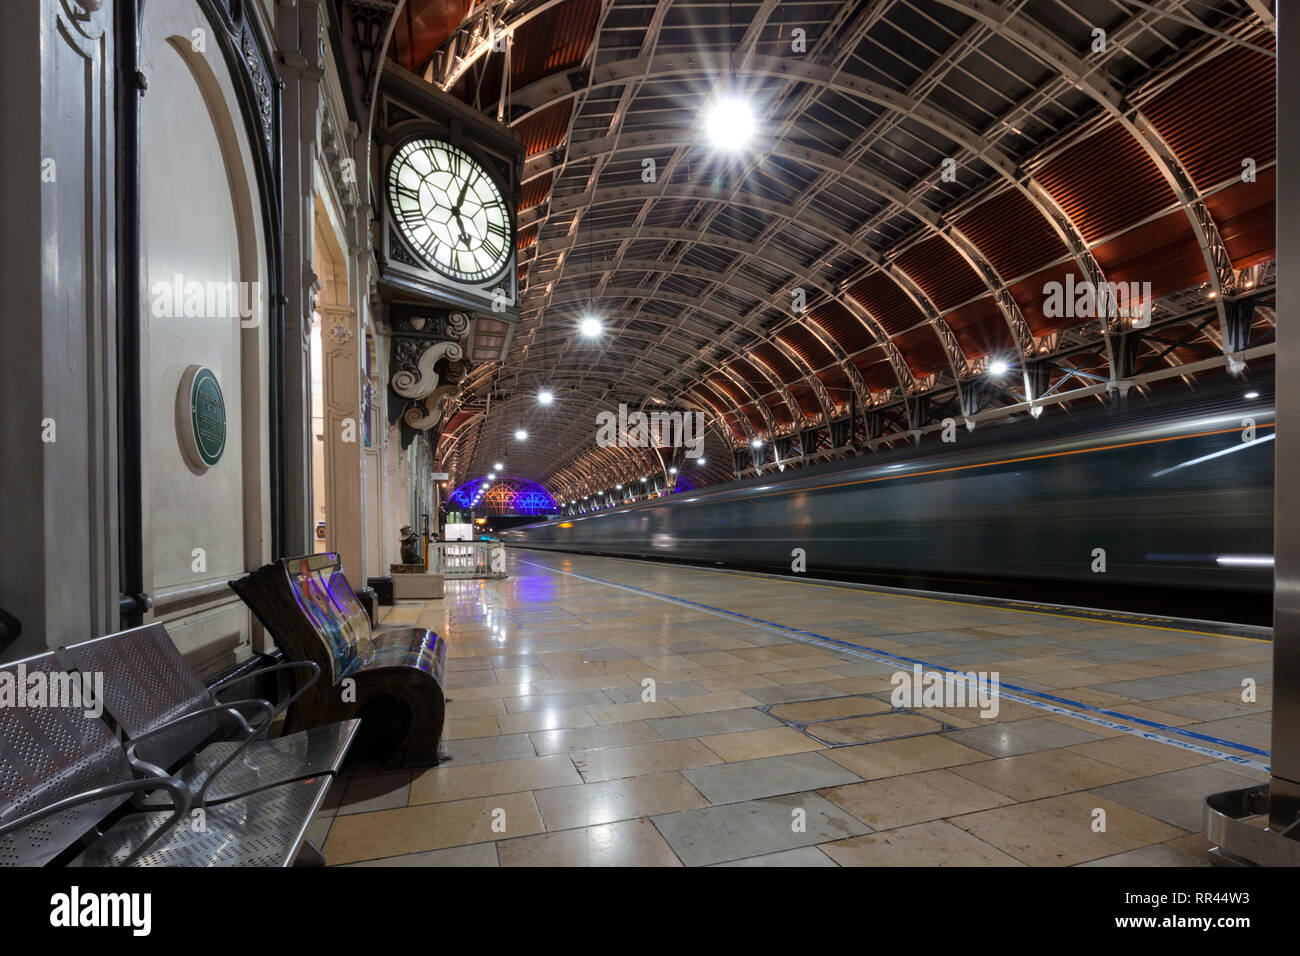 The  First Great Western night Riviera sleeper train from Penzance arriving at London Paddington Station with the station clock just after 5AM Stock Photo